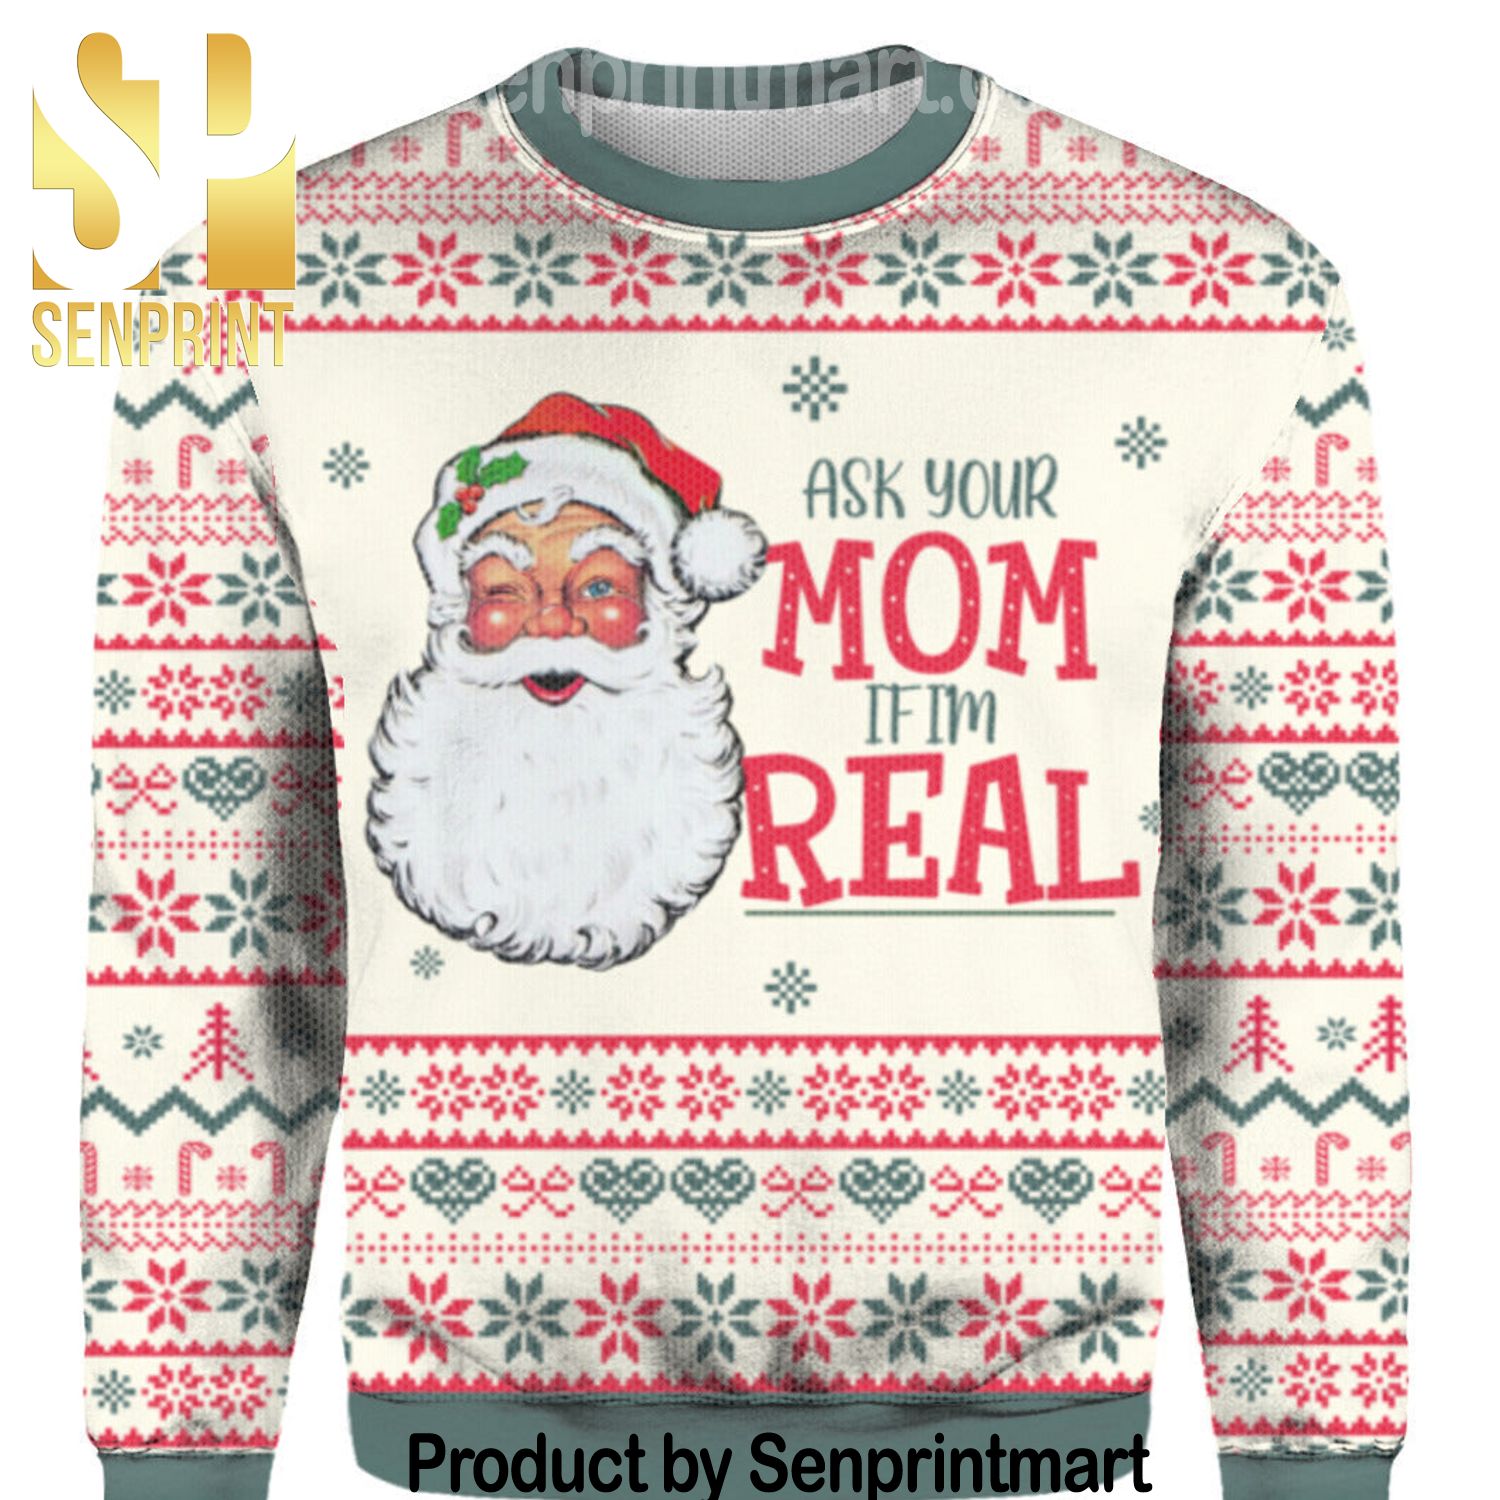 Ask Your Mom If Im Real Santa Claus Xmas Gifts Full Printed Wool Ugly Christmas Sweater